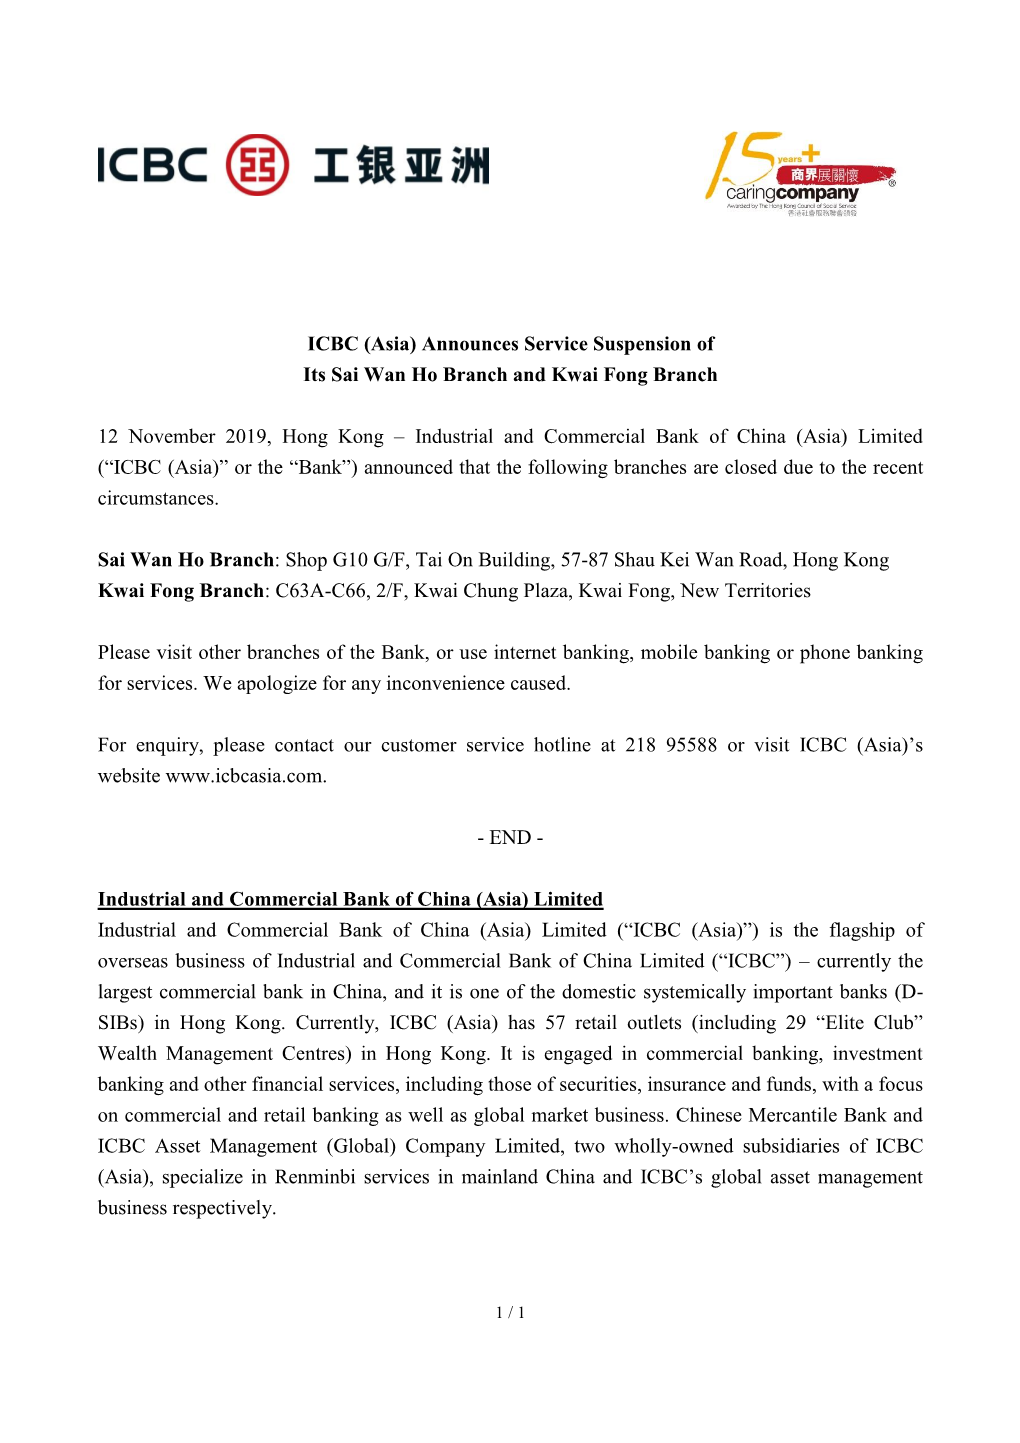 ICBC (Asia) Announces Service Suspension of Its Sai Wan Ho Branch and Kwai Fong Branch